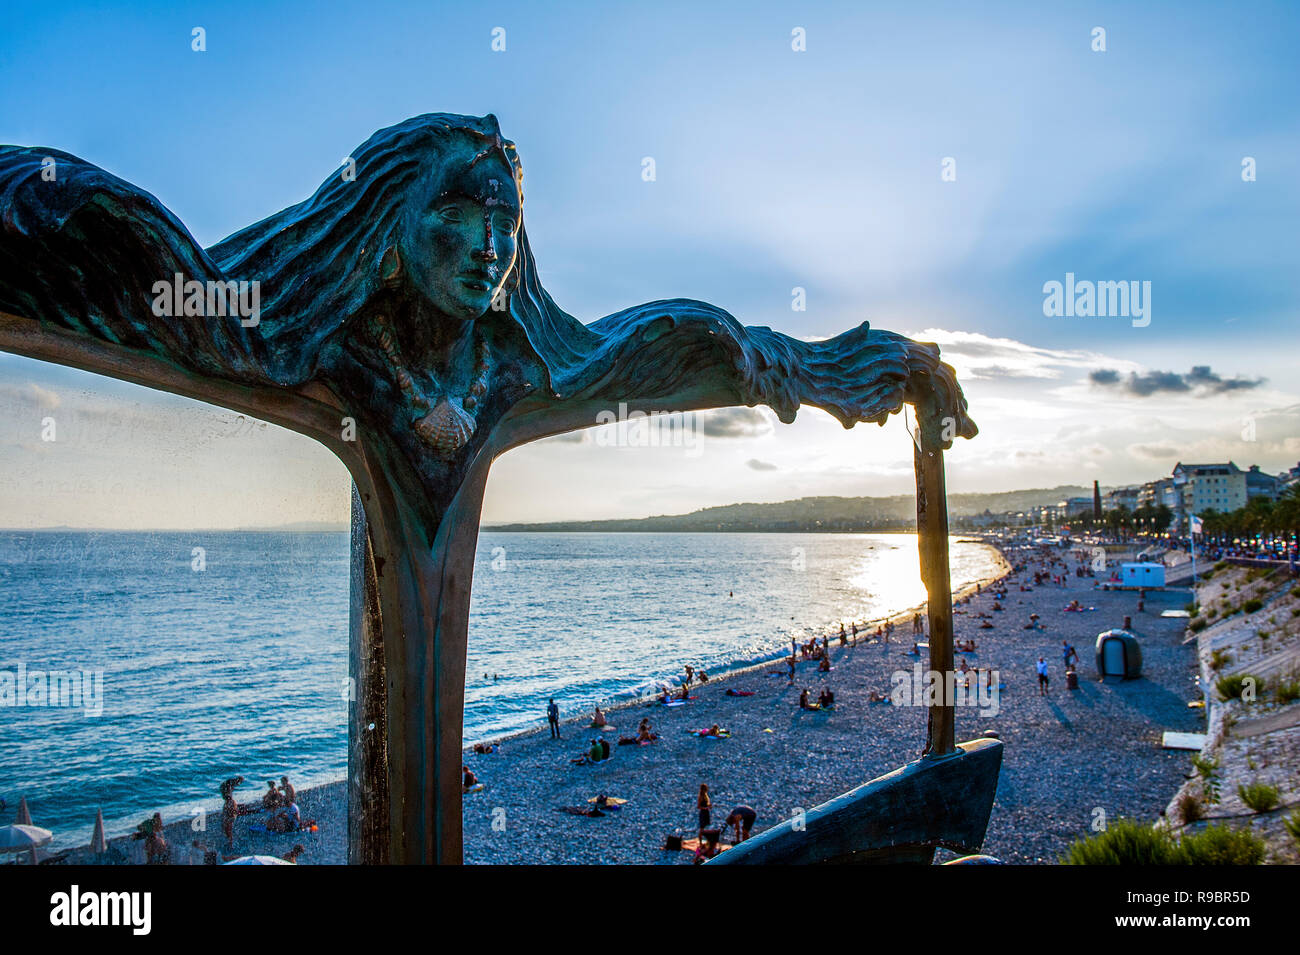 France, Alpes-Maritimes (06), Nice. Baie des Anges. Sculpture at the entrance to the private beach 'Castel' Stock Photo